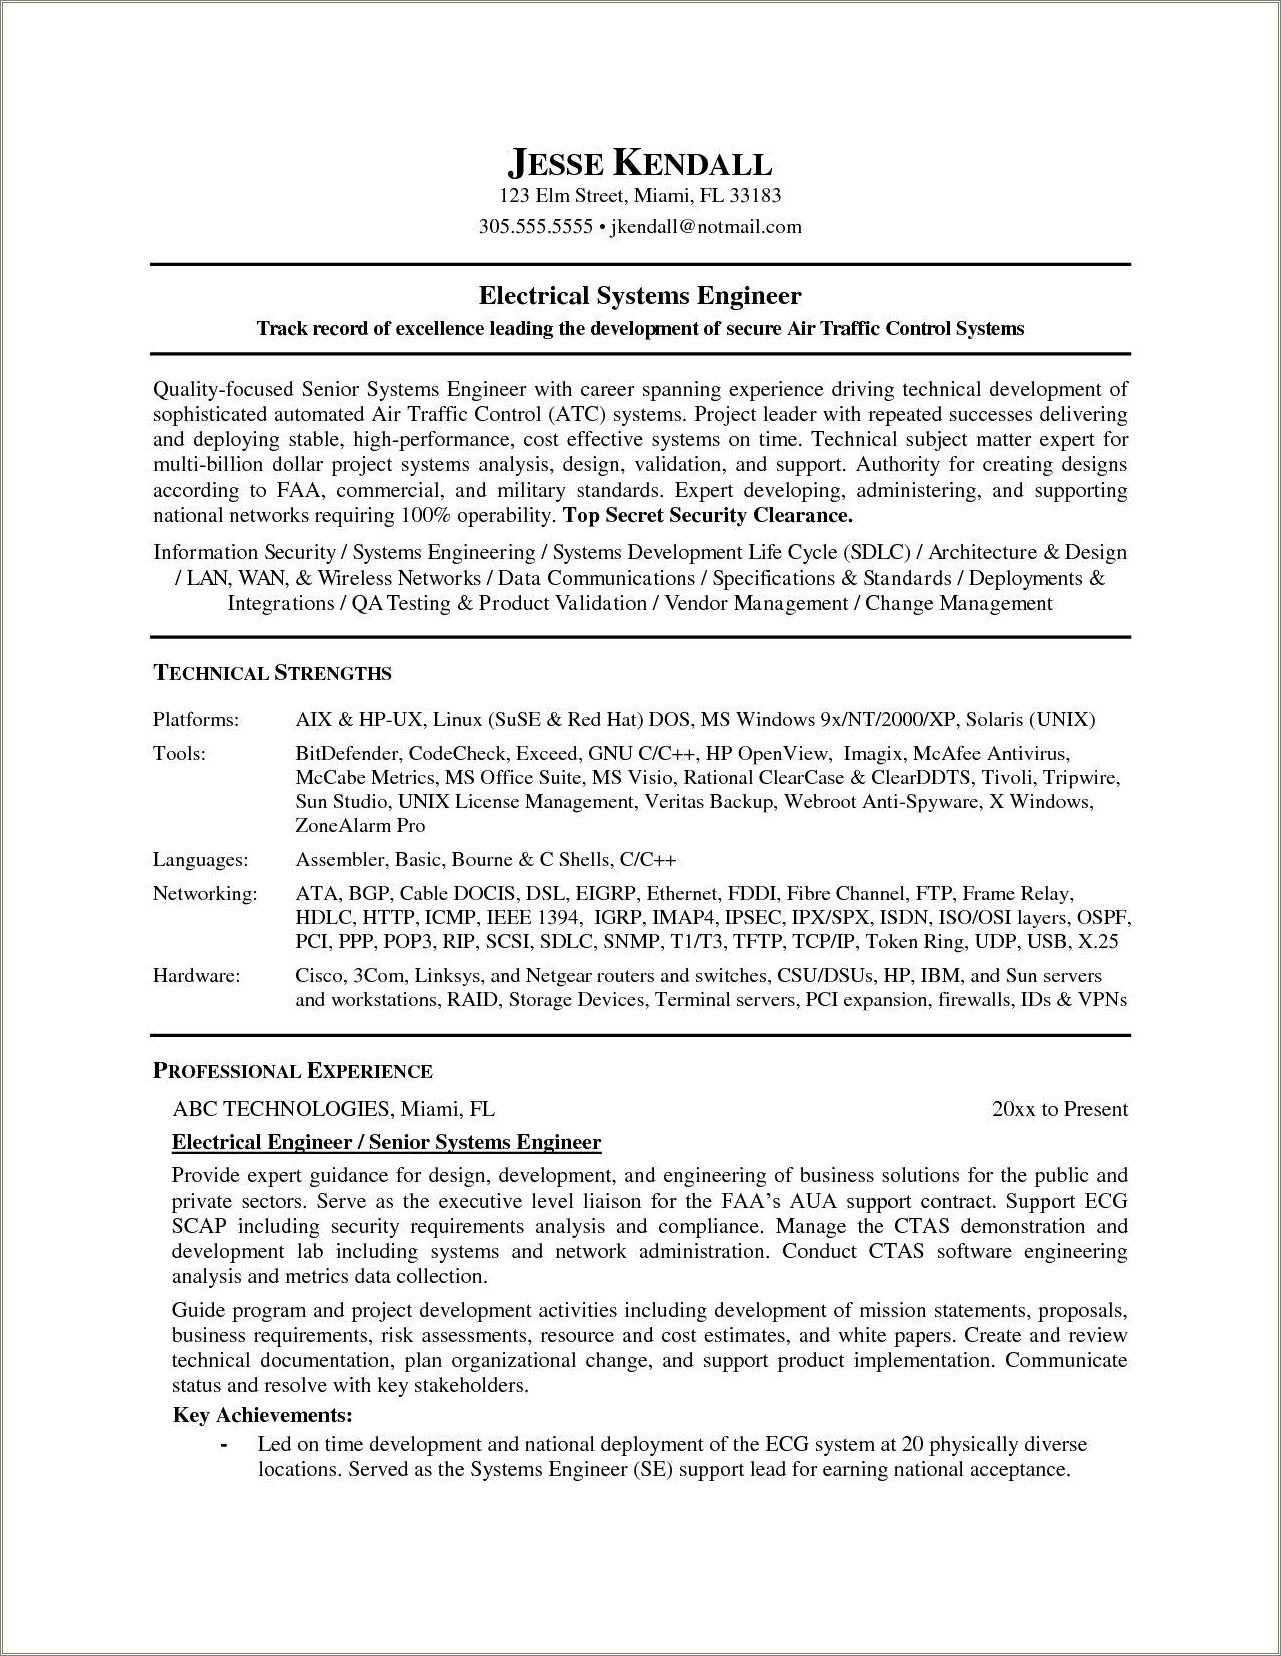 Control Systems Engineer Sample Resume